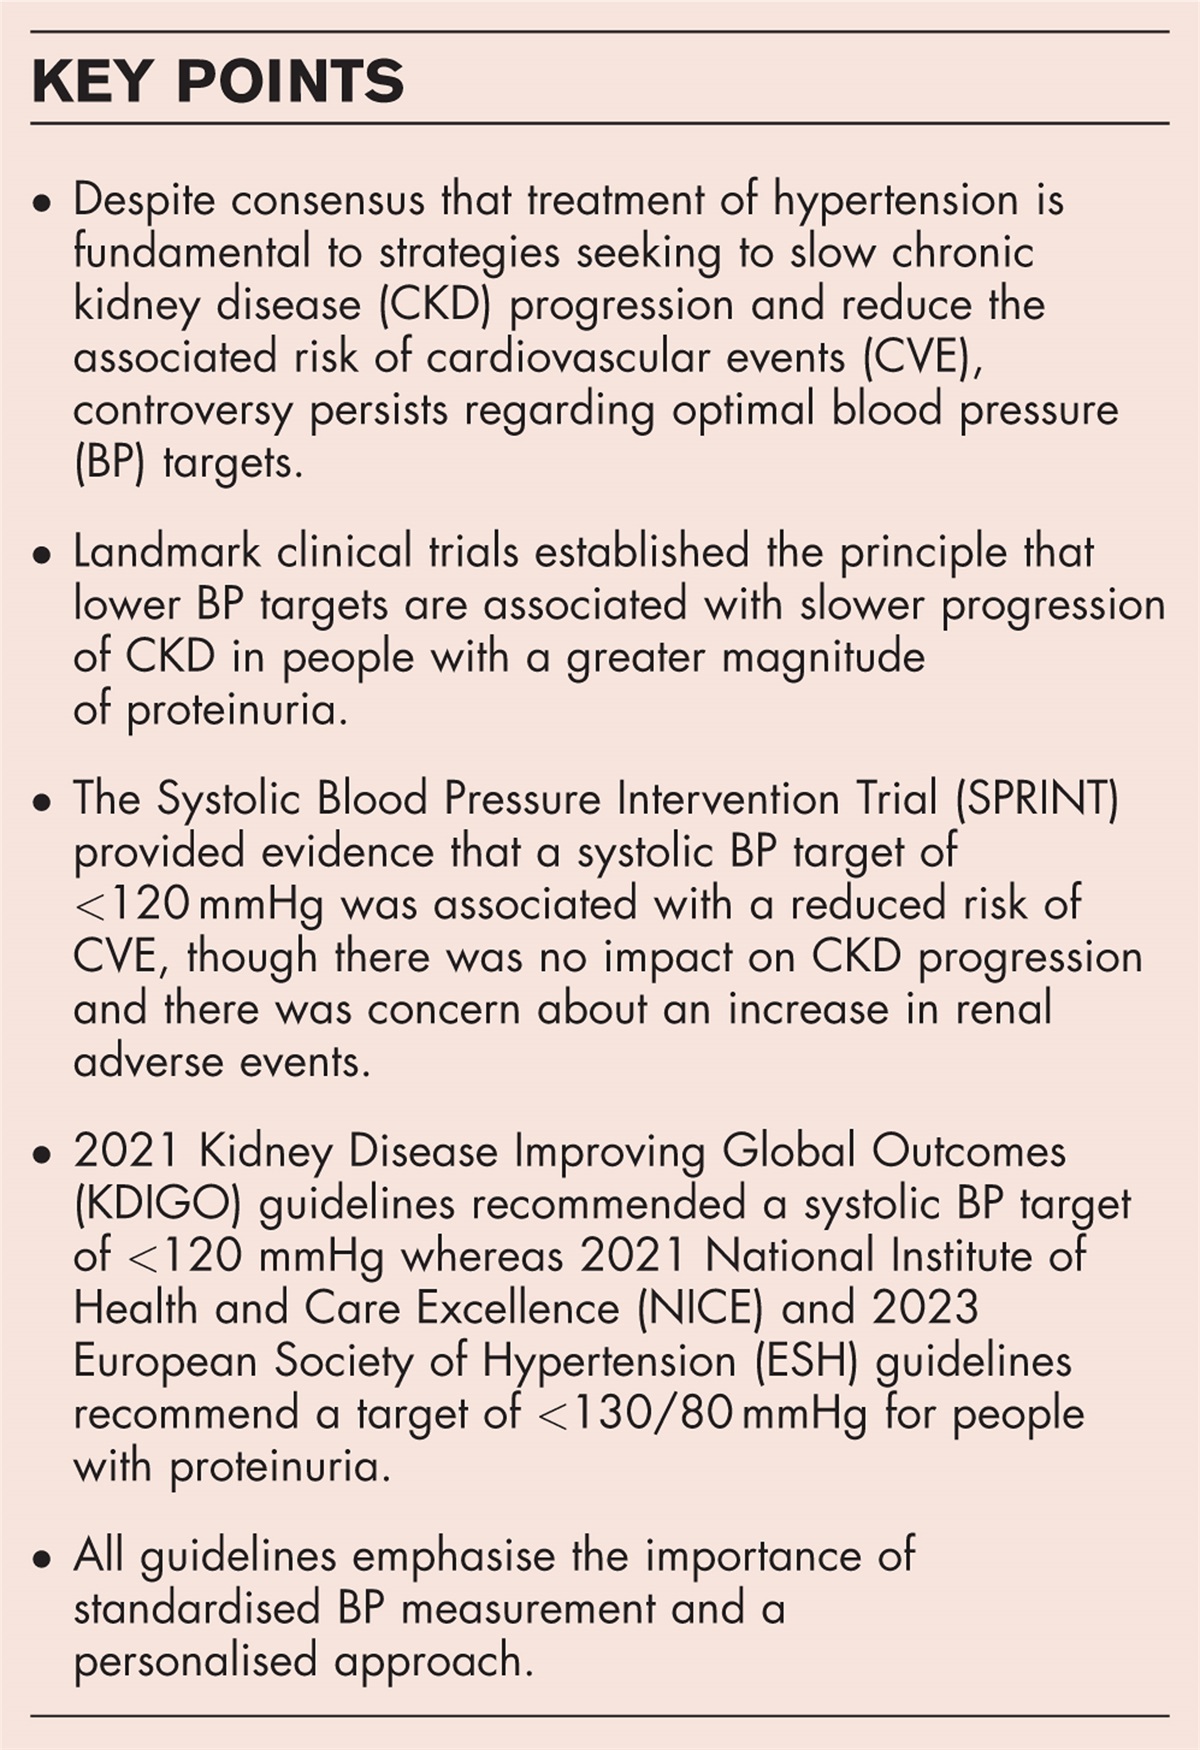 Blood pressure targets in chronic kidney disease: still no consensus